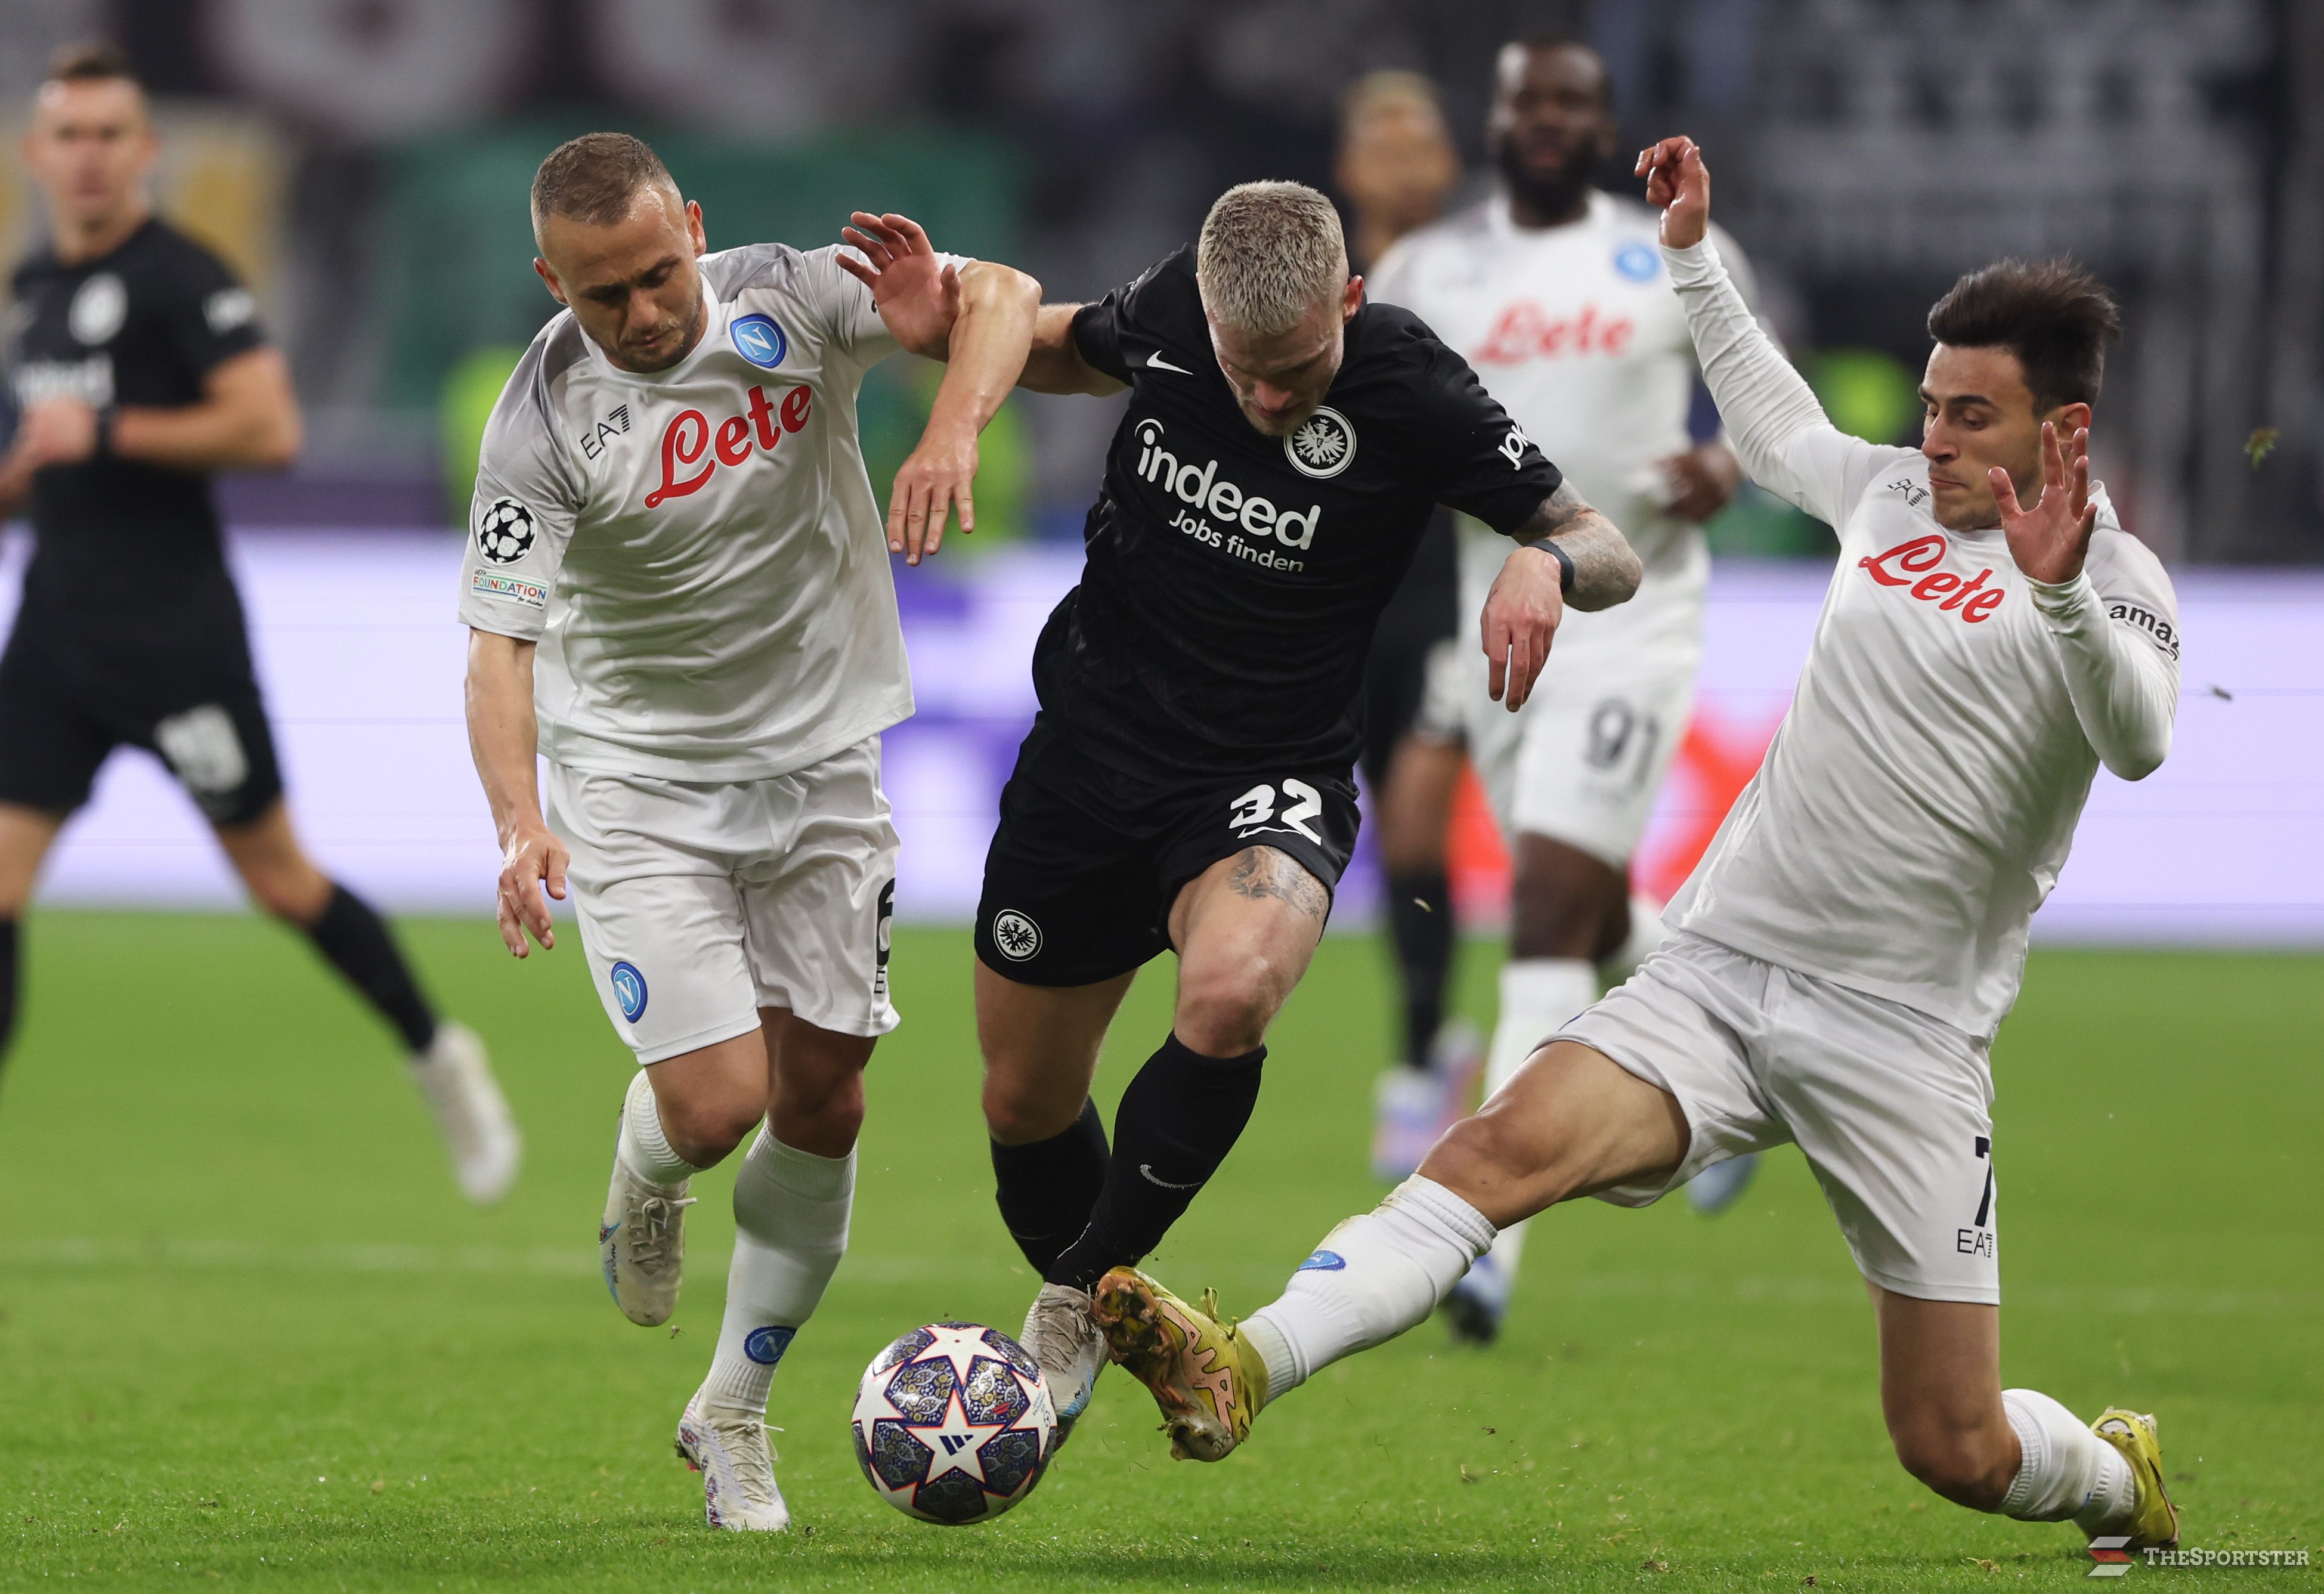 FRANKFURT AM MAIN, GERMANY - FEBRUARY 21: Philipp Max of Eintracht Frankfurt runs with the ball whilst under pressure from Mario Rui and Eljif Elmas of SSC Napoli during the UEFA Champions League round of 16 leg one match between Eintracht Frankfurt and SSC Napoli at Deutsche Bank Park on February 21, 2023 in Frankfurt am Main, Germany. (Photo by Christian Kaspar-Bartke/Getty Images)